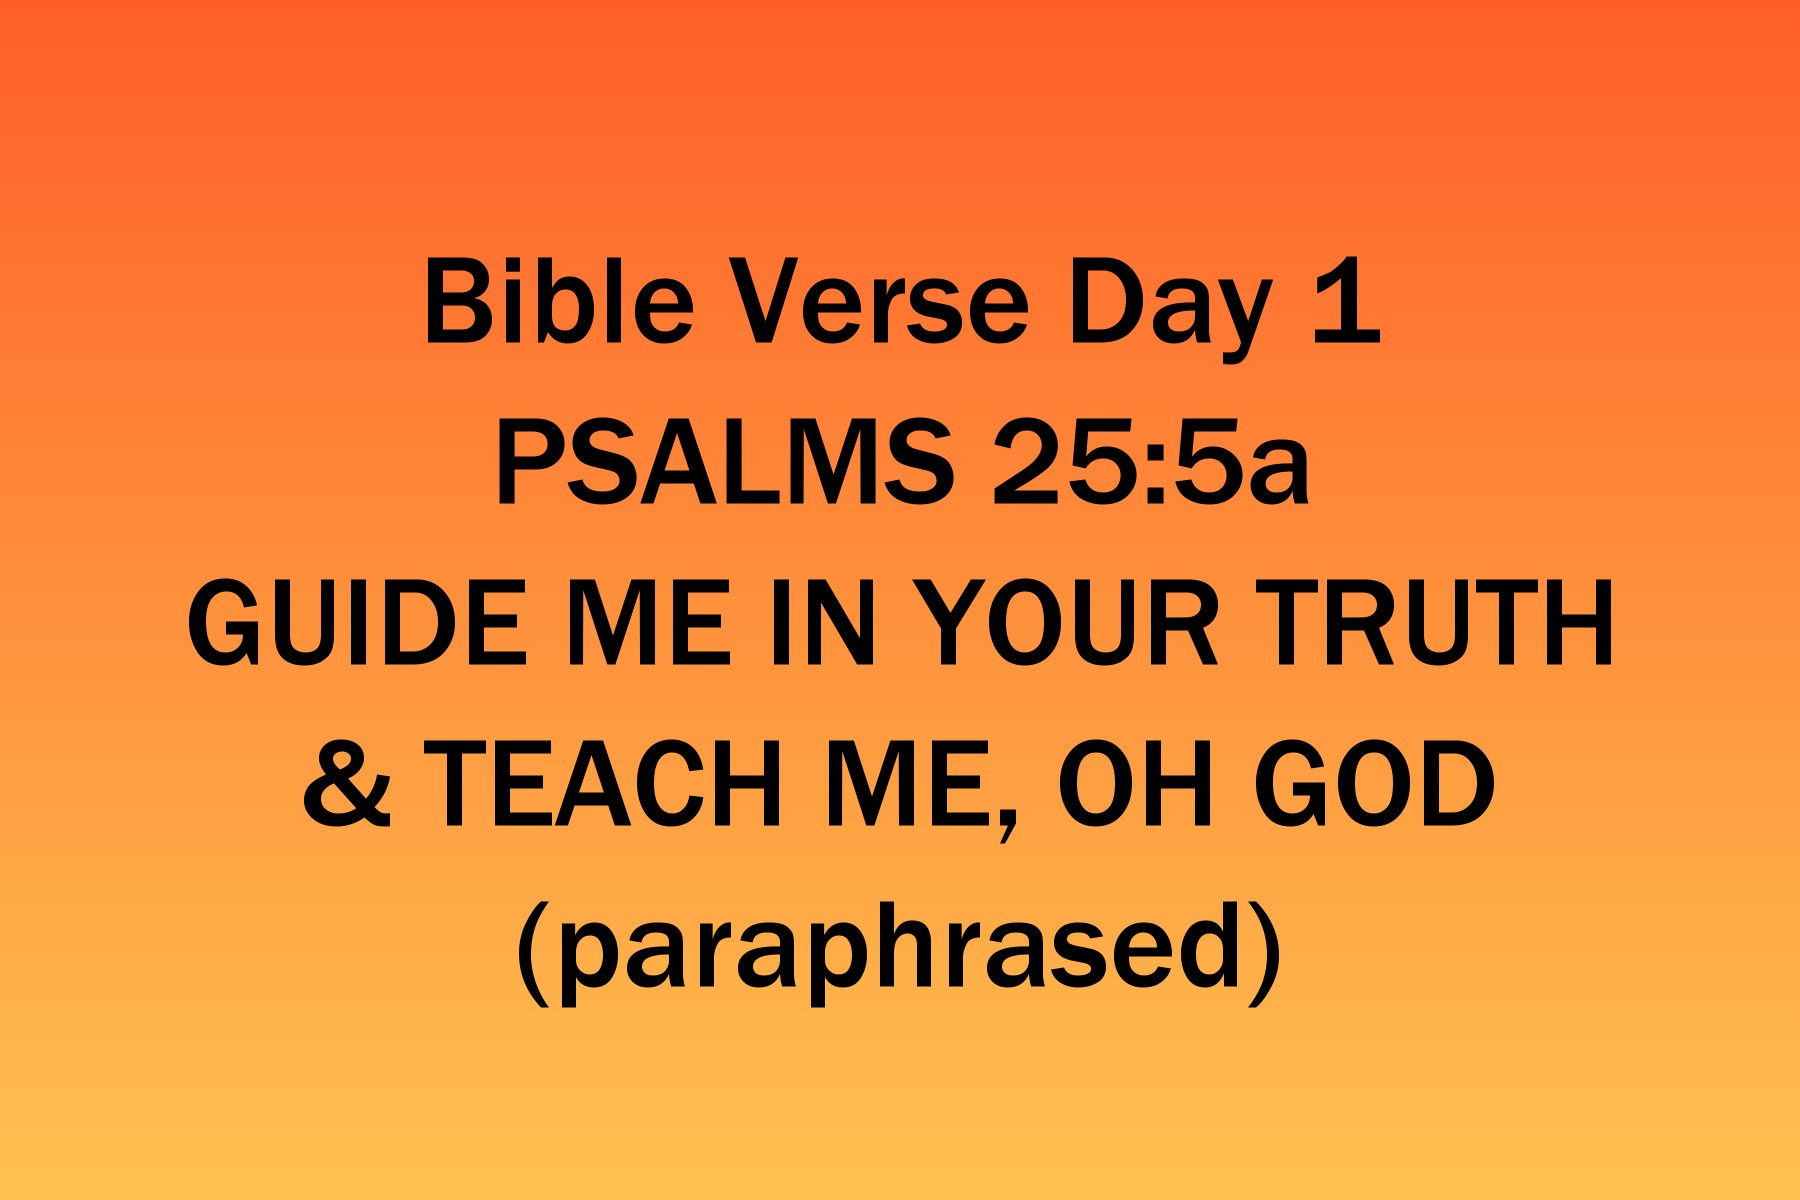 Day 1 Bible Verse from Psalms 25:5a